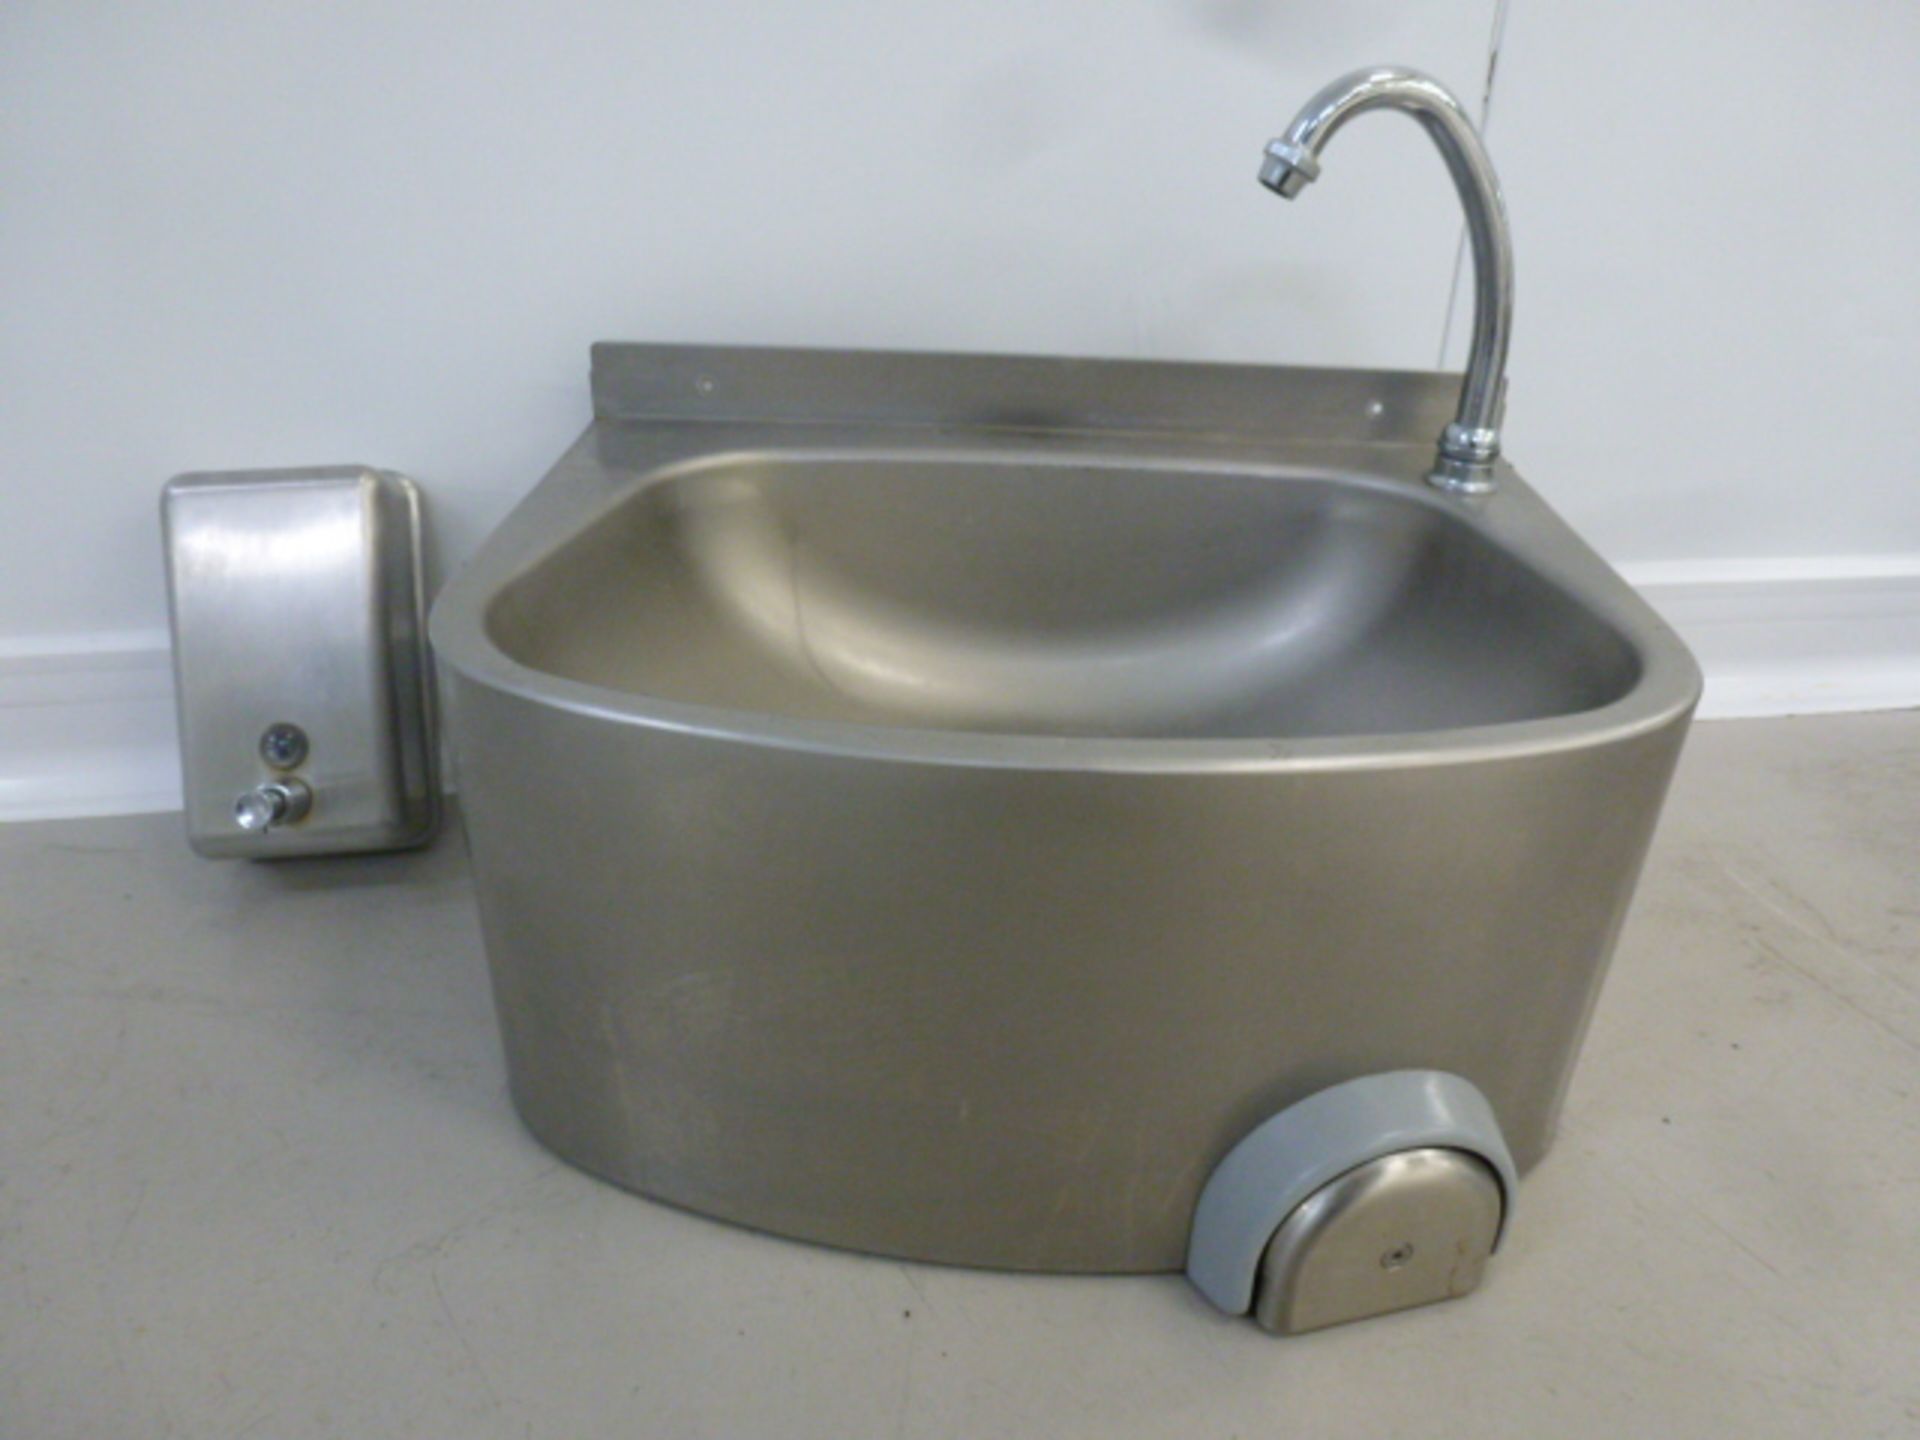 Stainless Steel Knee Operated Hand Wash Basin with Soap Dispenser.